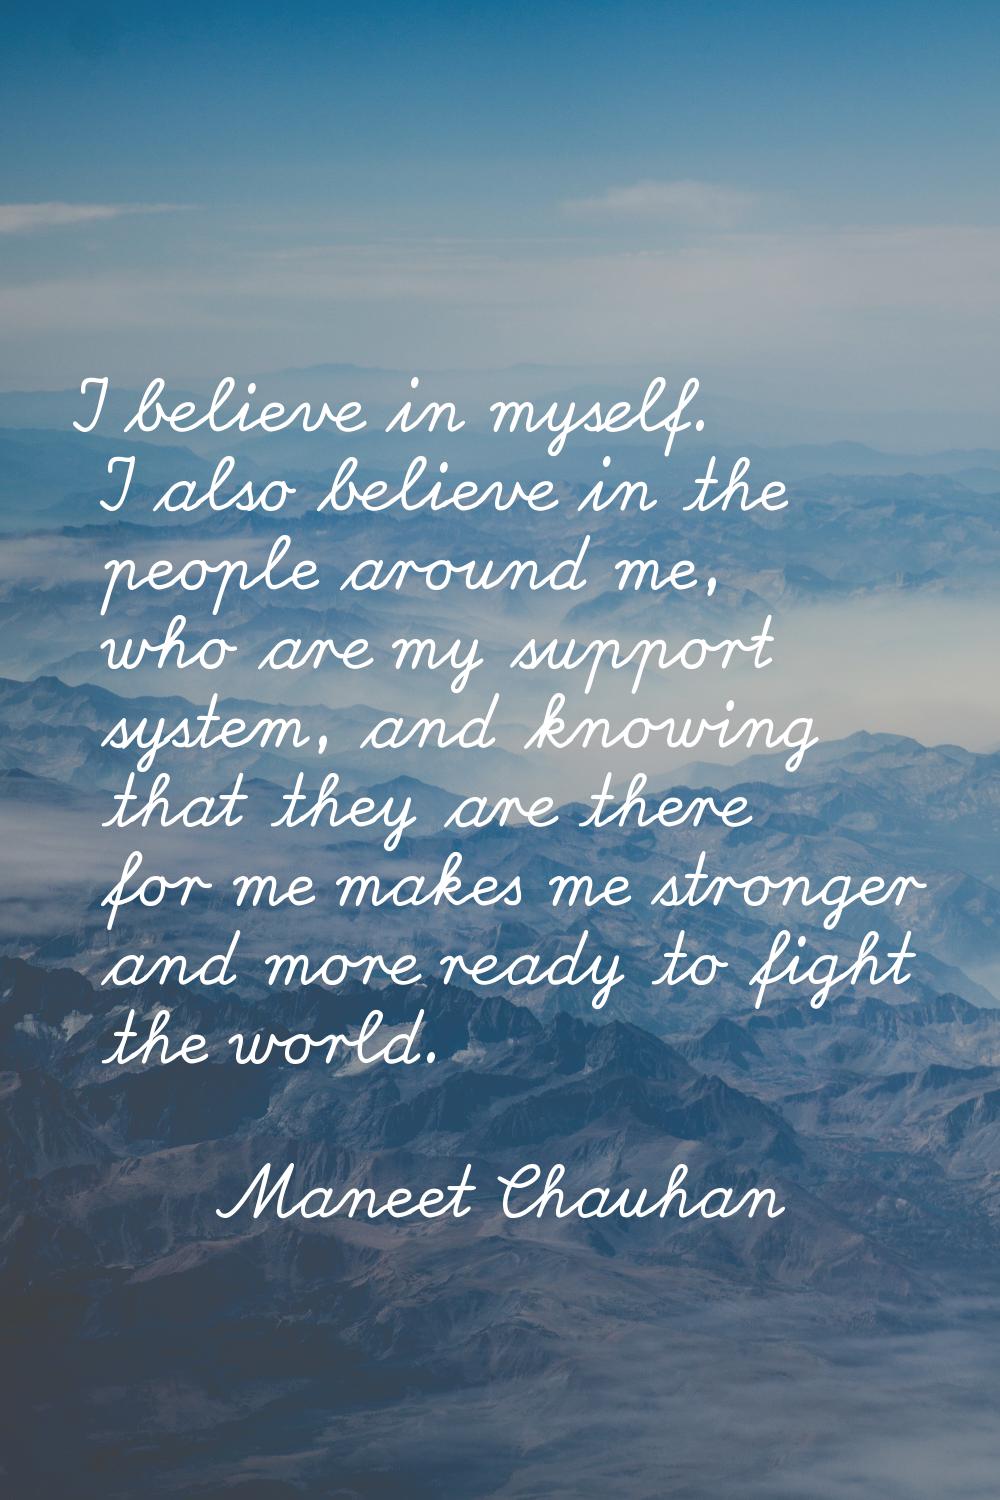 I believe in myself. I also believe in the people around me, who are my support system, and knowing